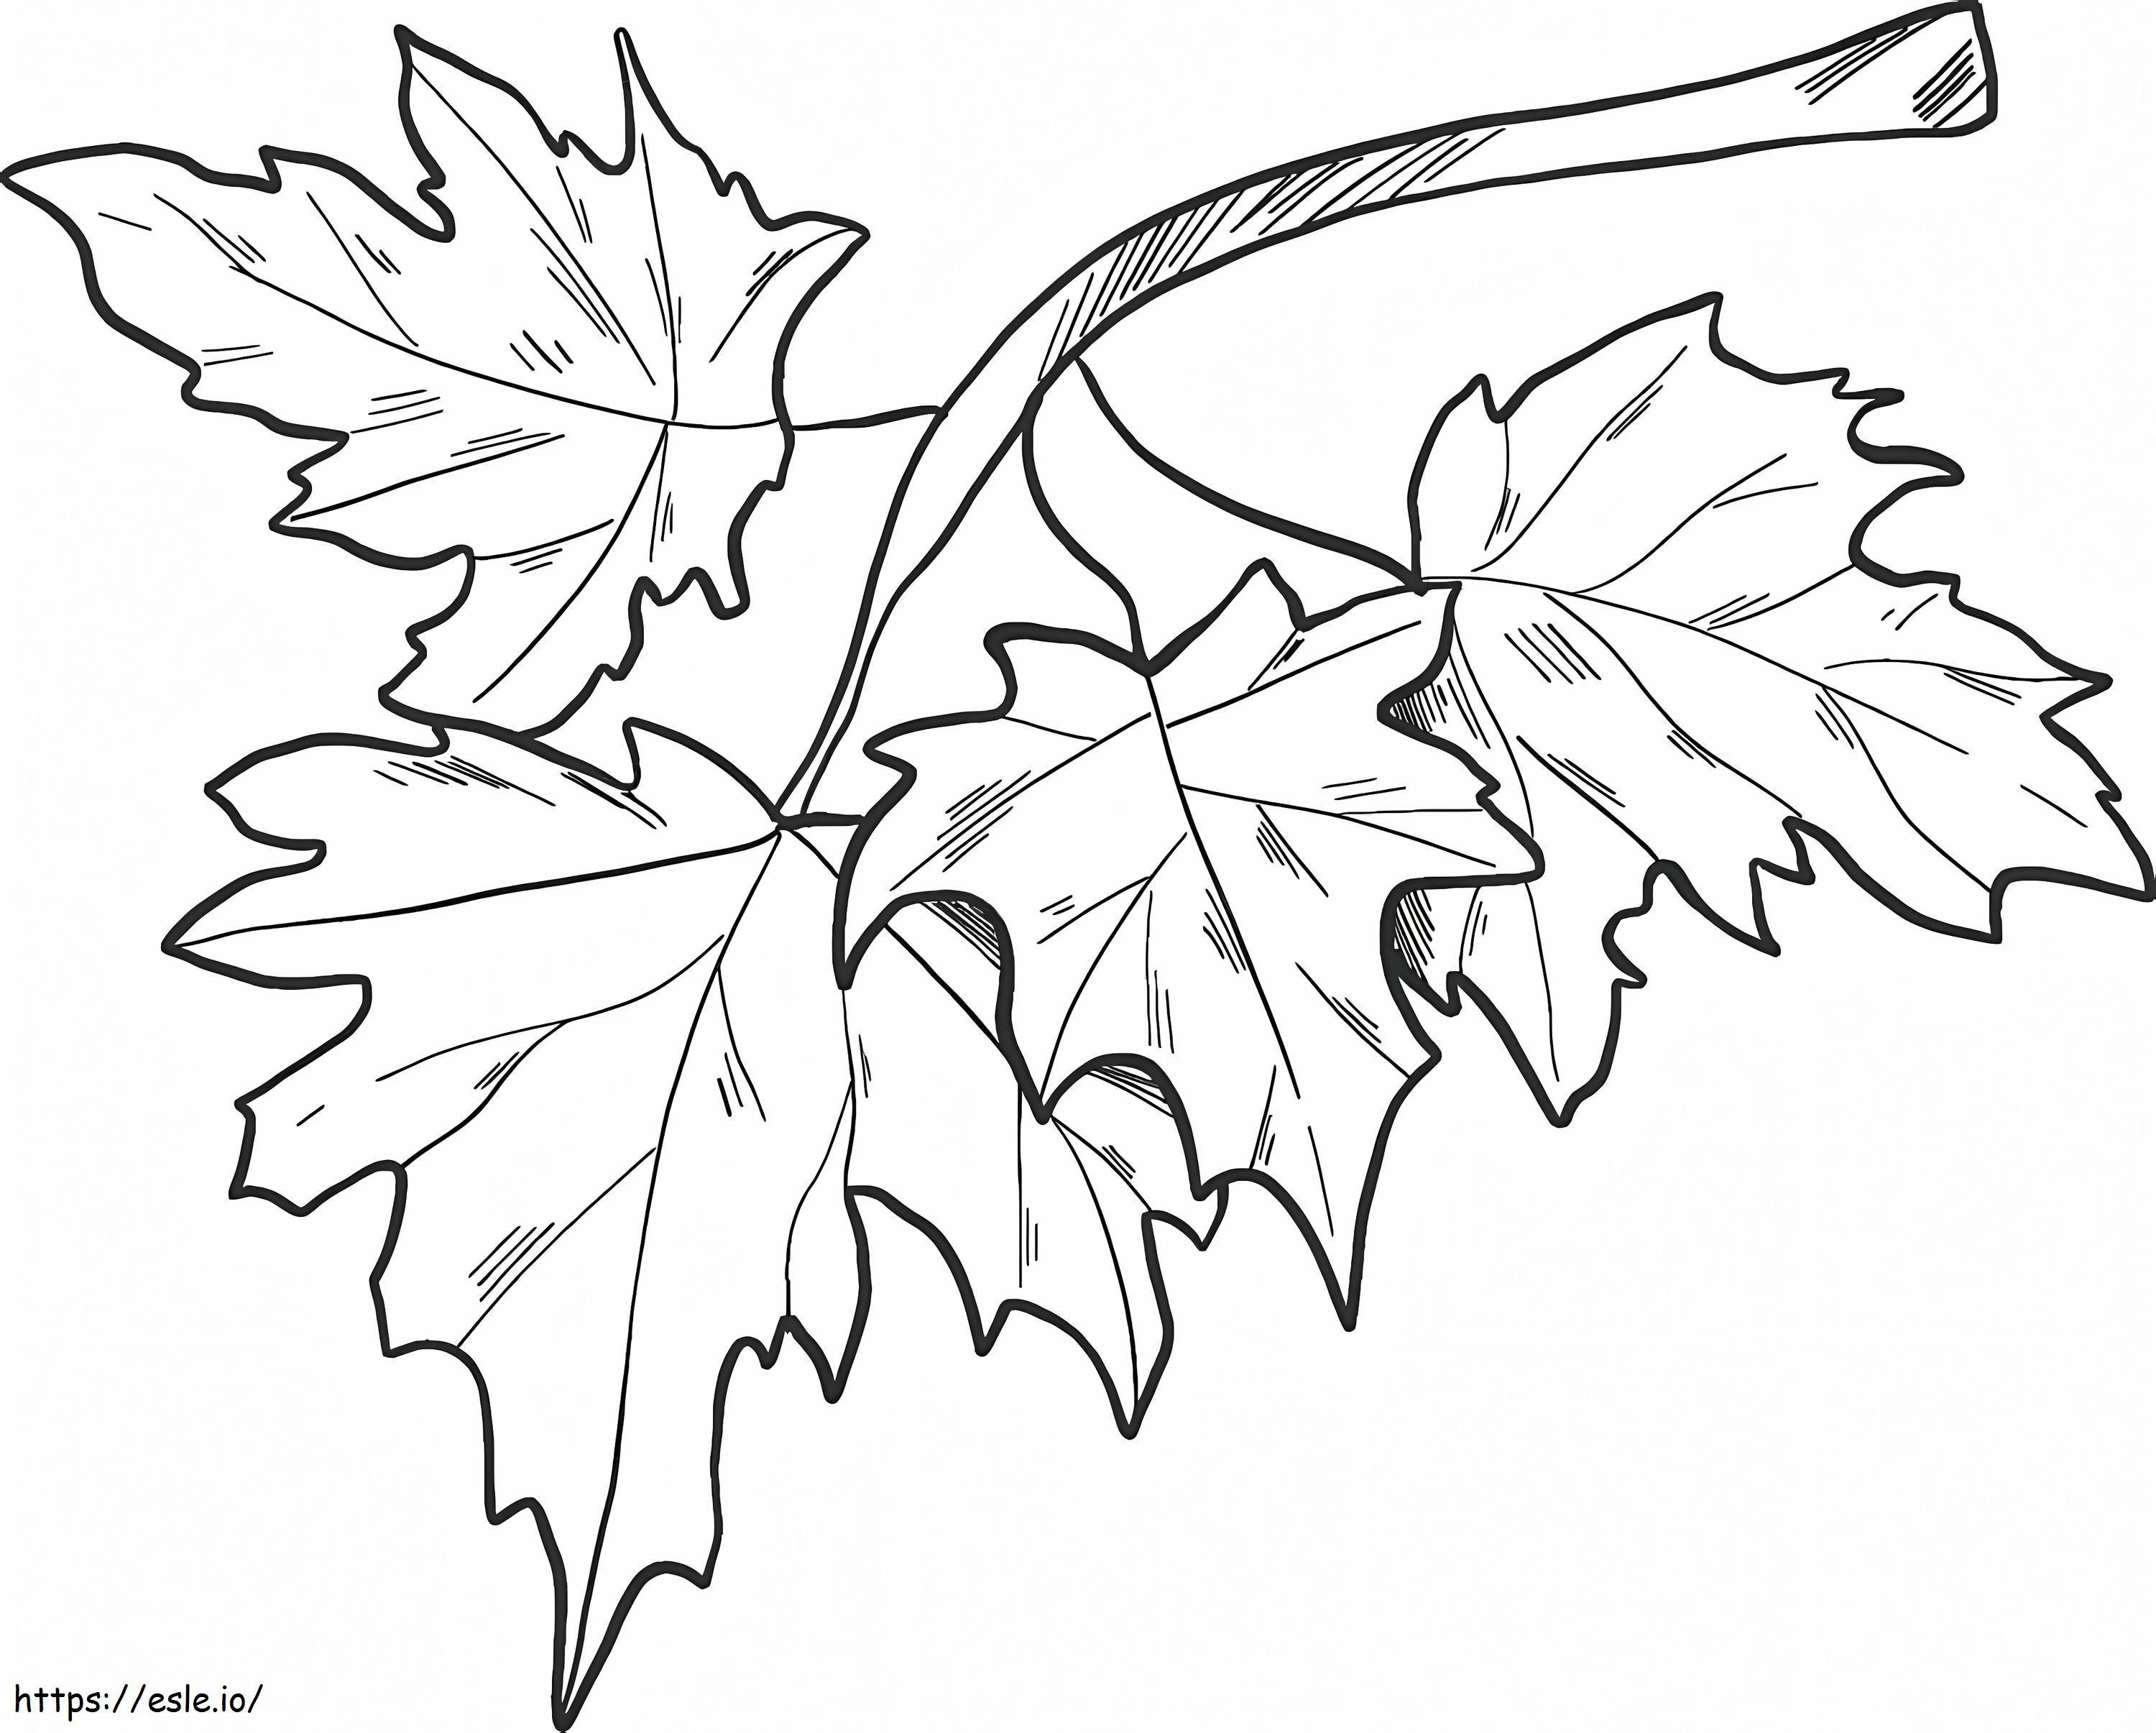 Fall Leaves On A Branch coloring page